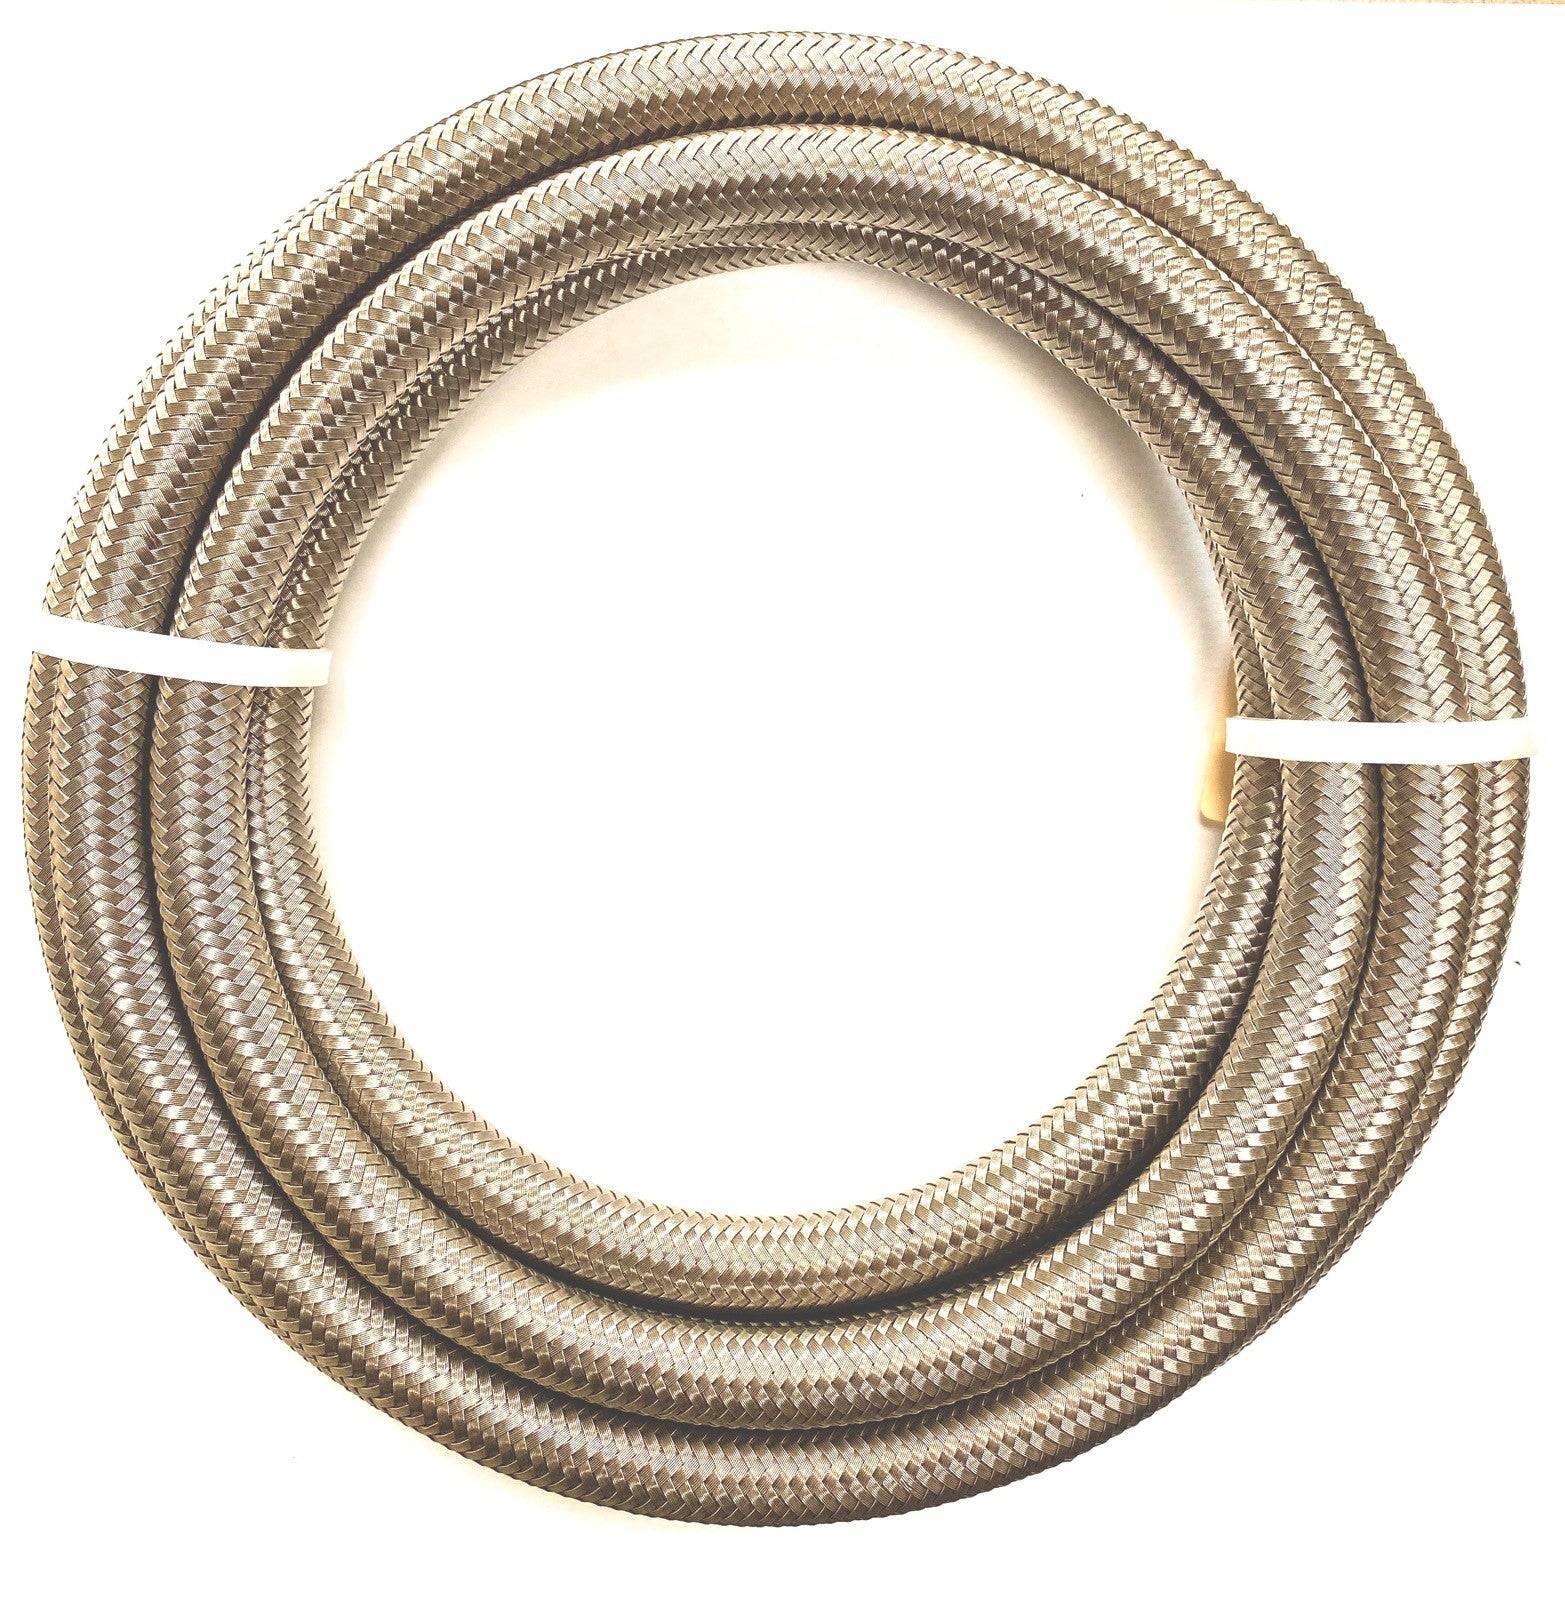 08 Stainless Braided Hose Per Ft